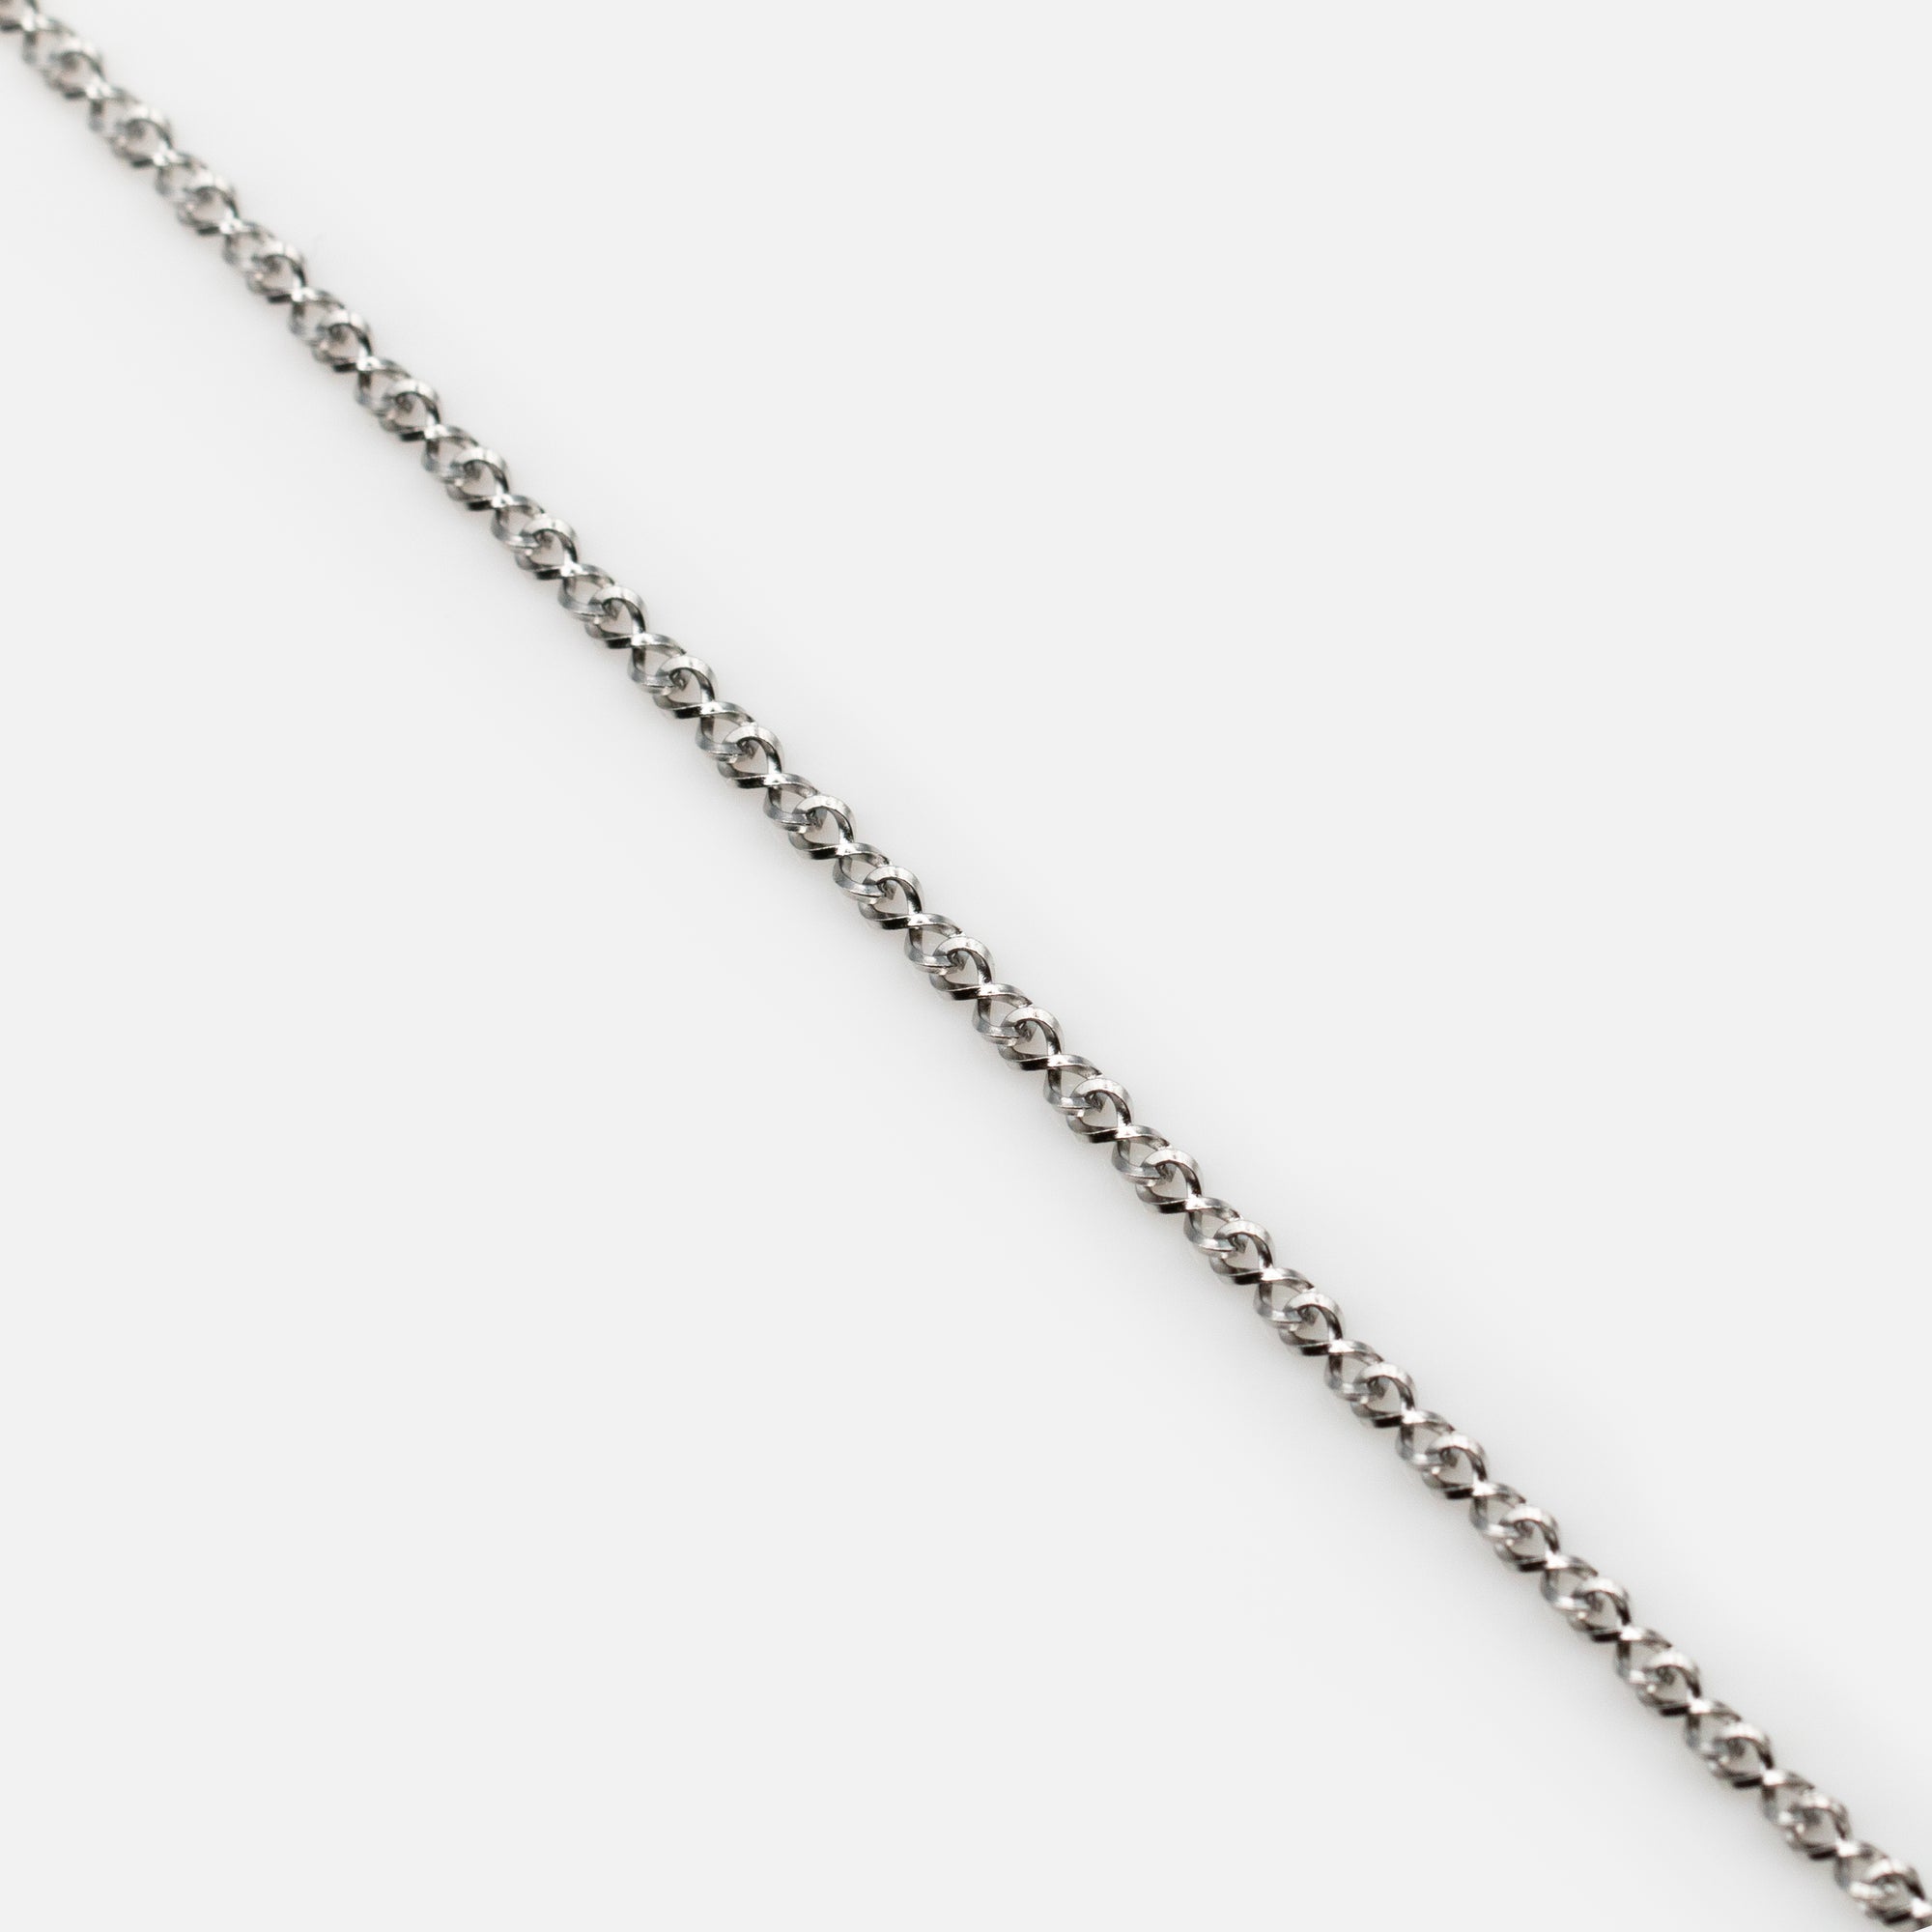 Silver anklet with stainless steel infinite links